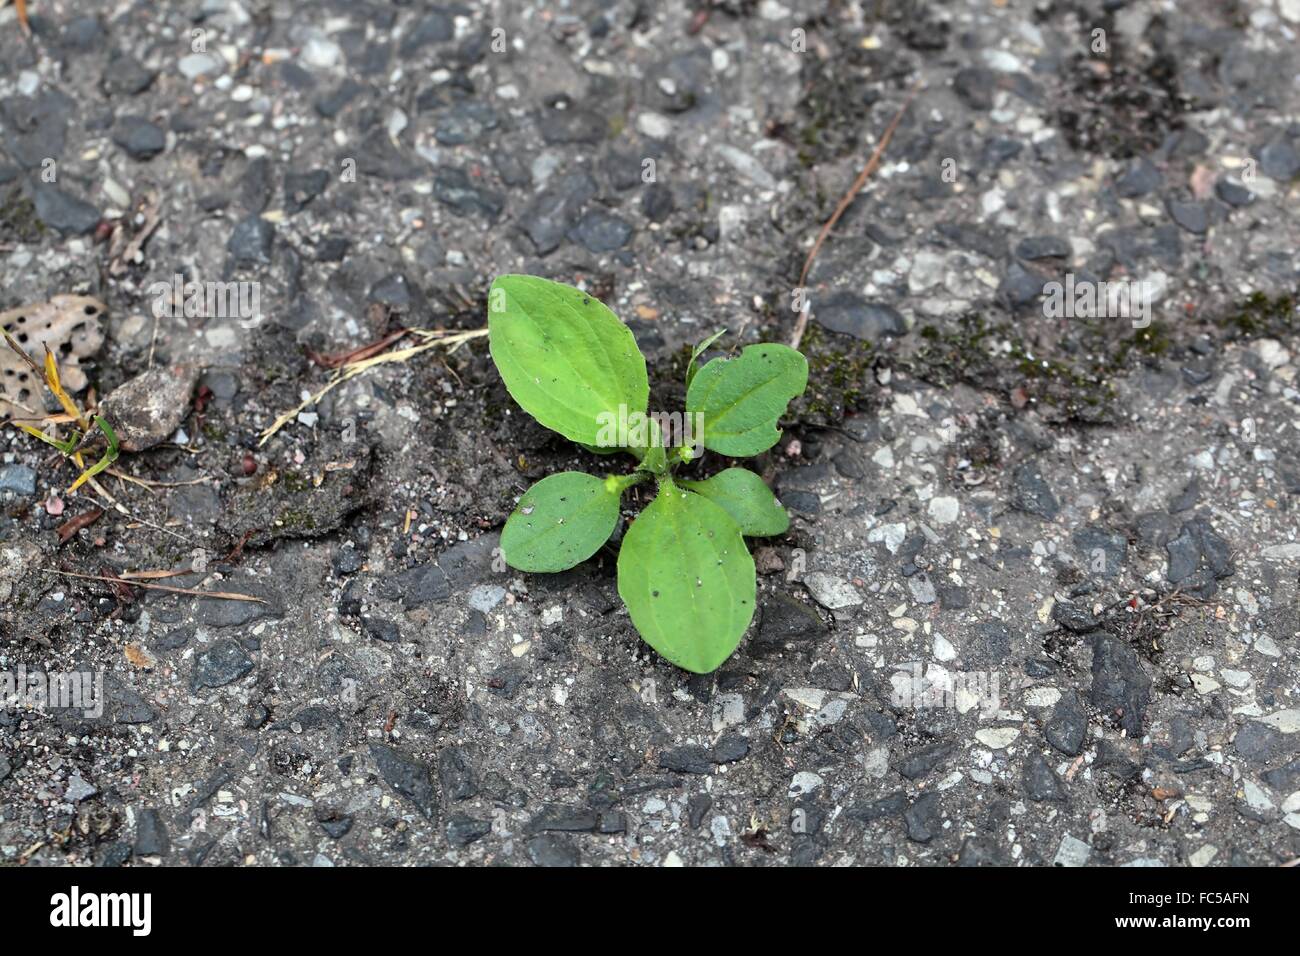 Green plants growing on a tarred road. Stock Photo